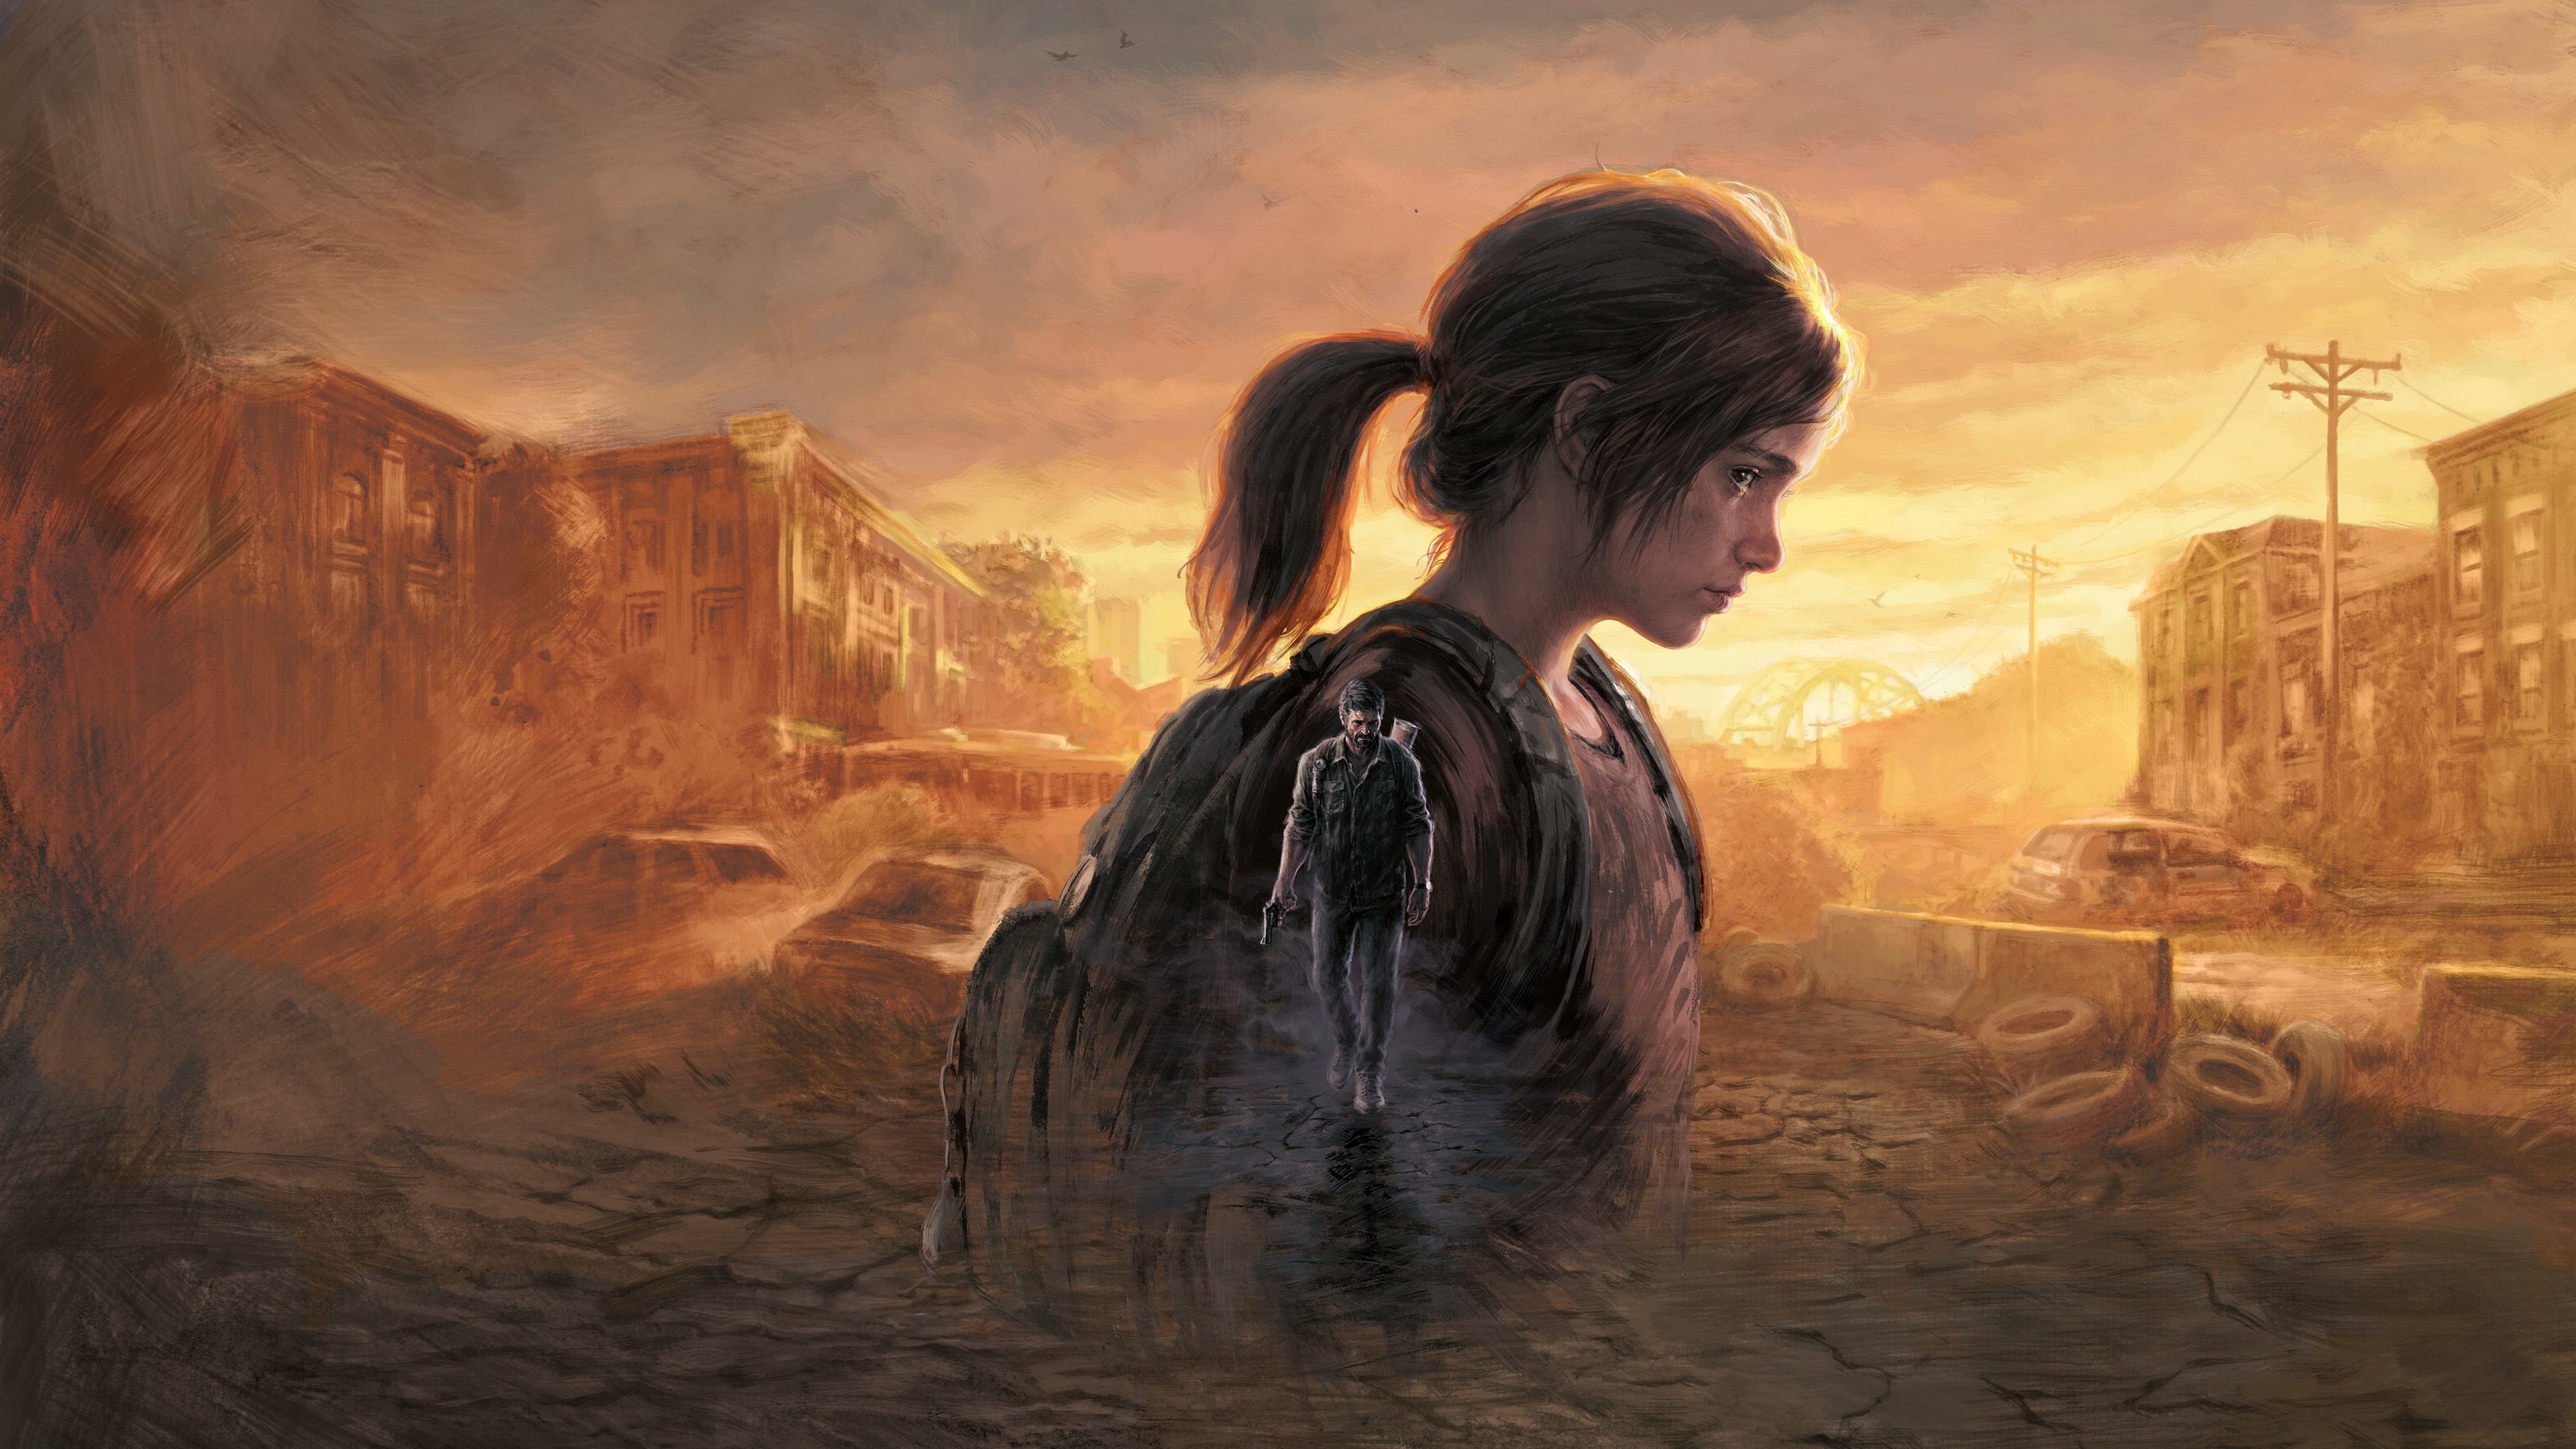 The Last of Us episode 3 review: An early contender for one of 2023's best  episodes